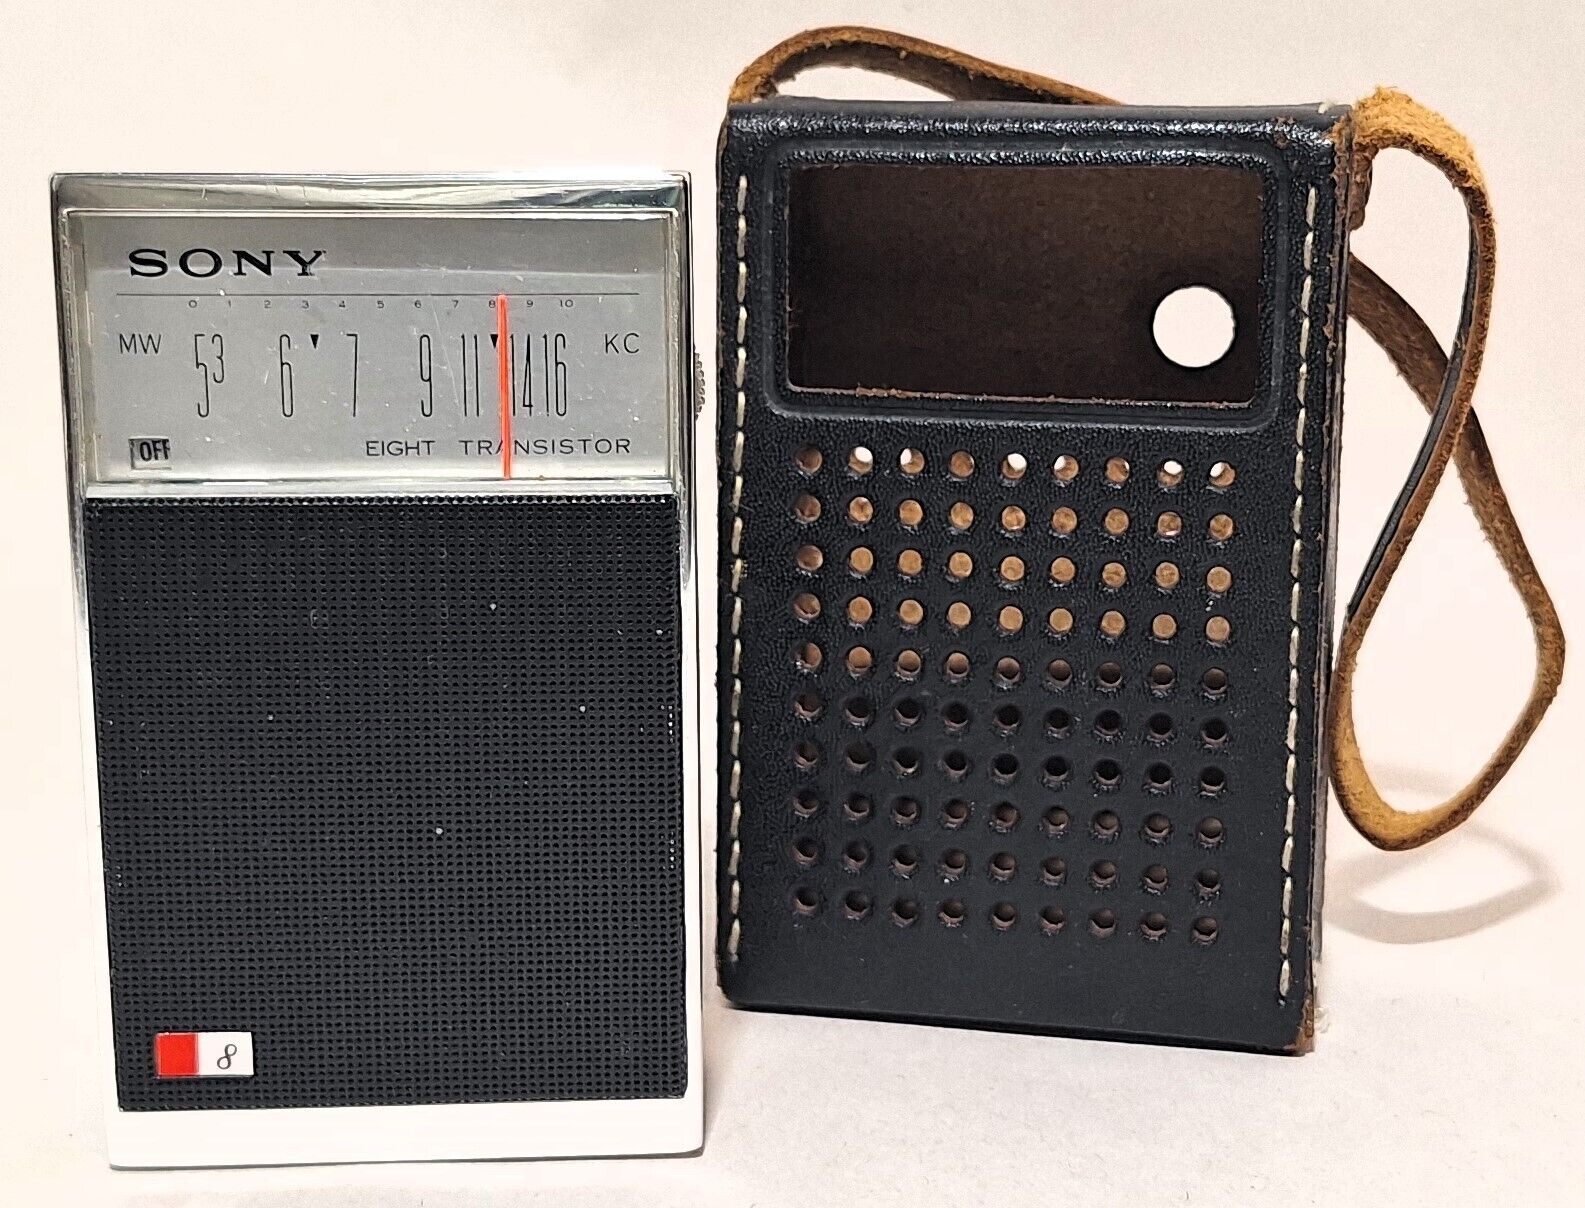 Vtg Sony 8 Transistor TR-826 Portable AM Radio Tested Made in Japan Leather Case